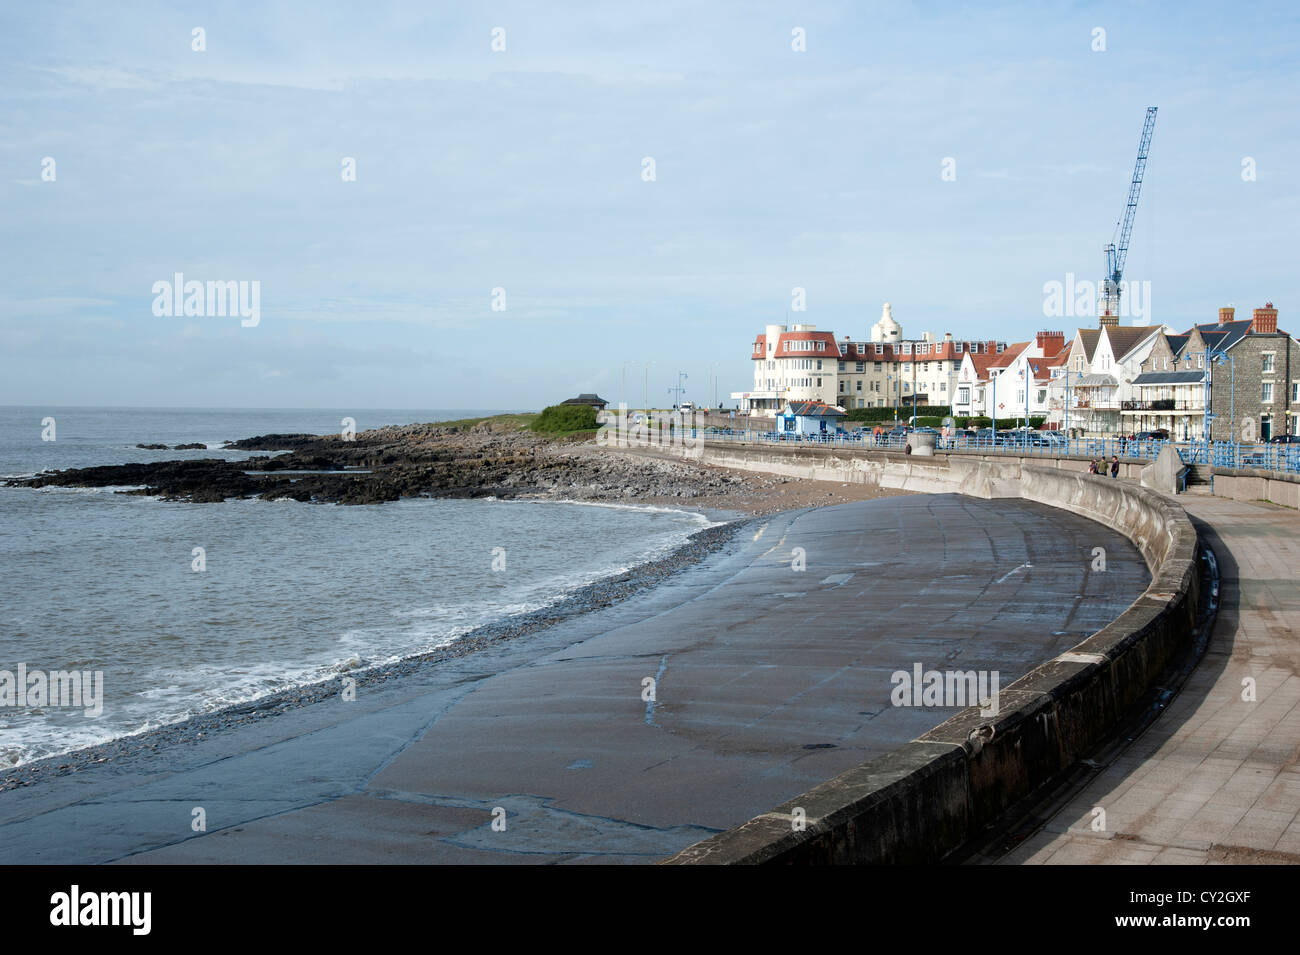 Seafront at Porthcawl South Wales UK Welsh seaside resort Stock Photo